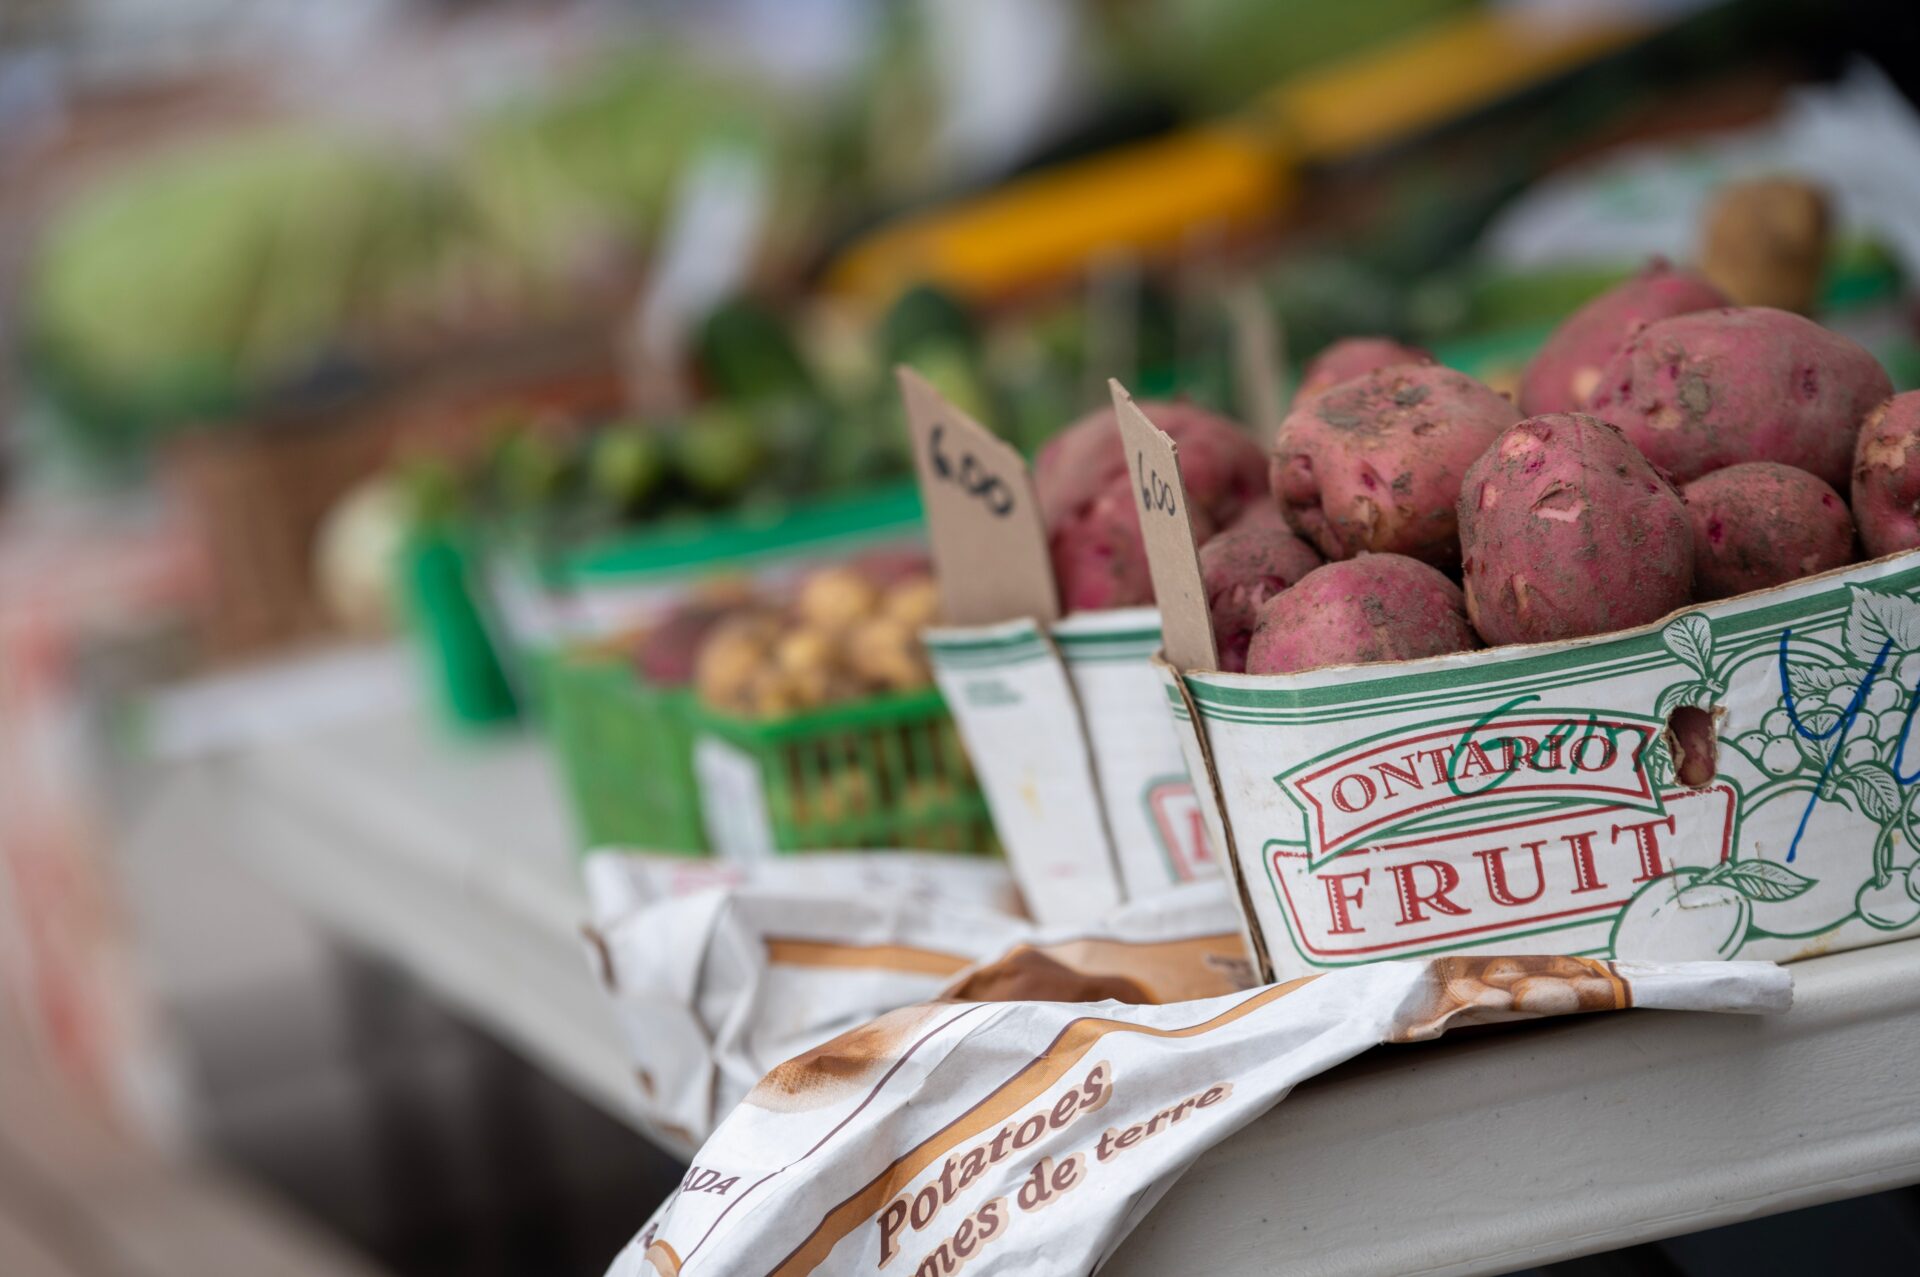 red potatoes in green and white box